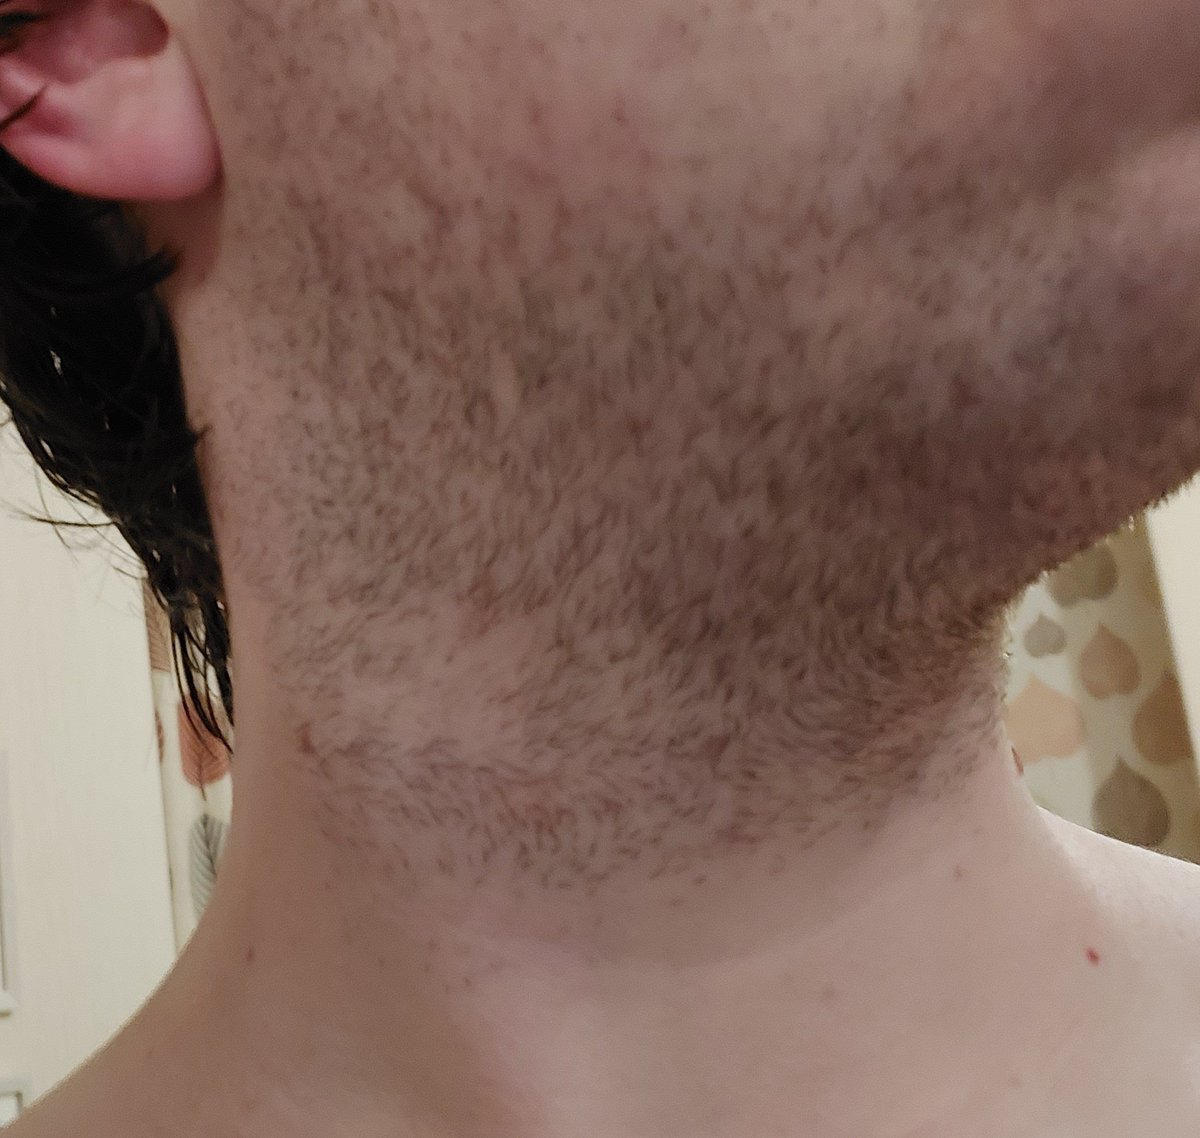 Millie CD/TS/Sissy в Twitter: „The first pic shows my facial hair growth  after 2 days before any IPL treatment, the second shows 2 days of growth  after 3 IPL sessions, what a